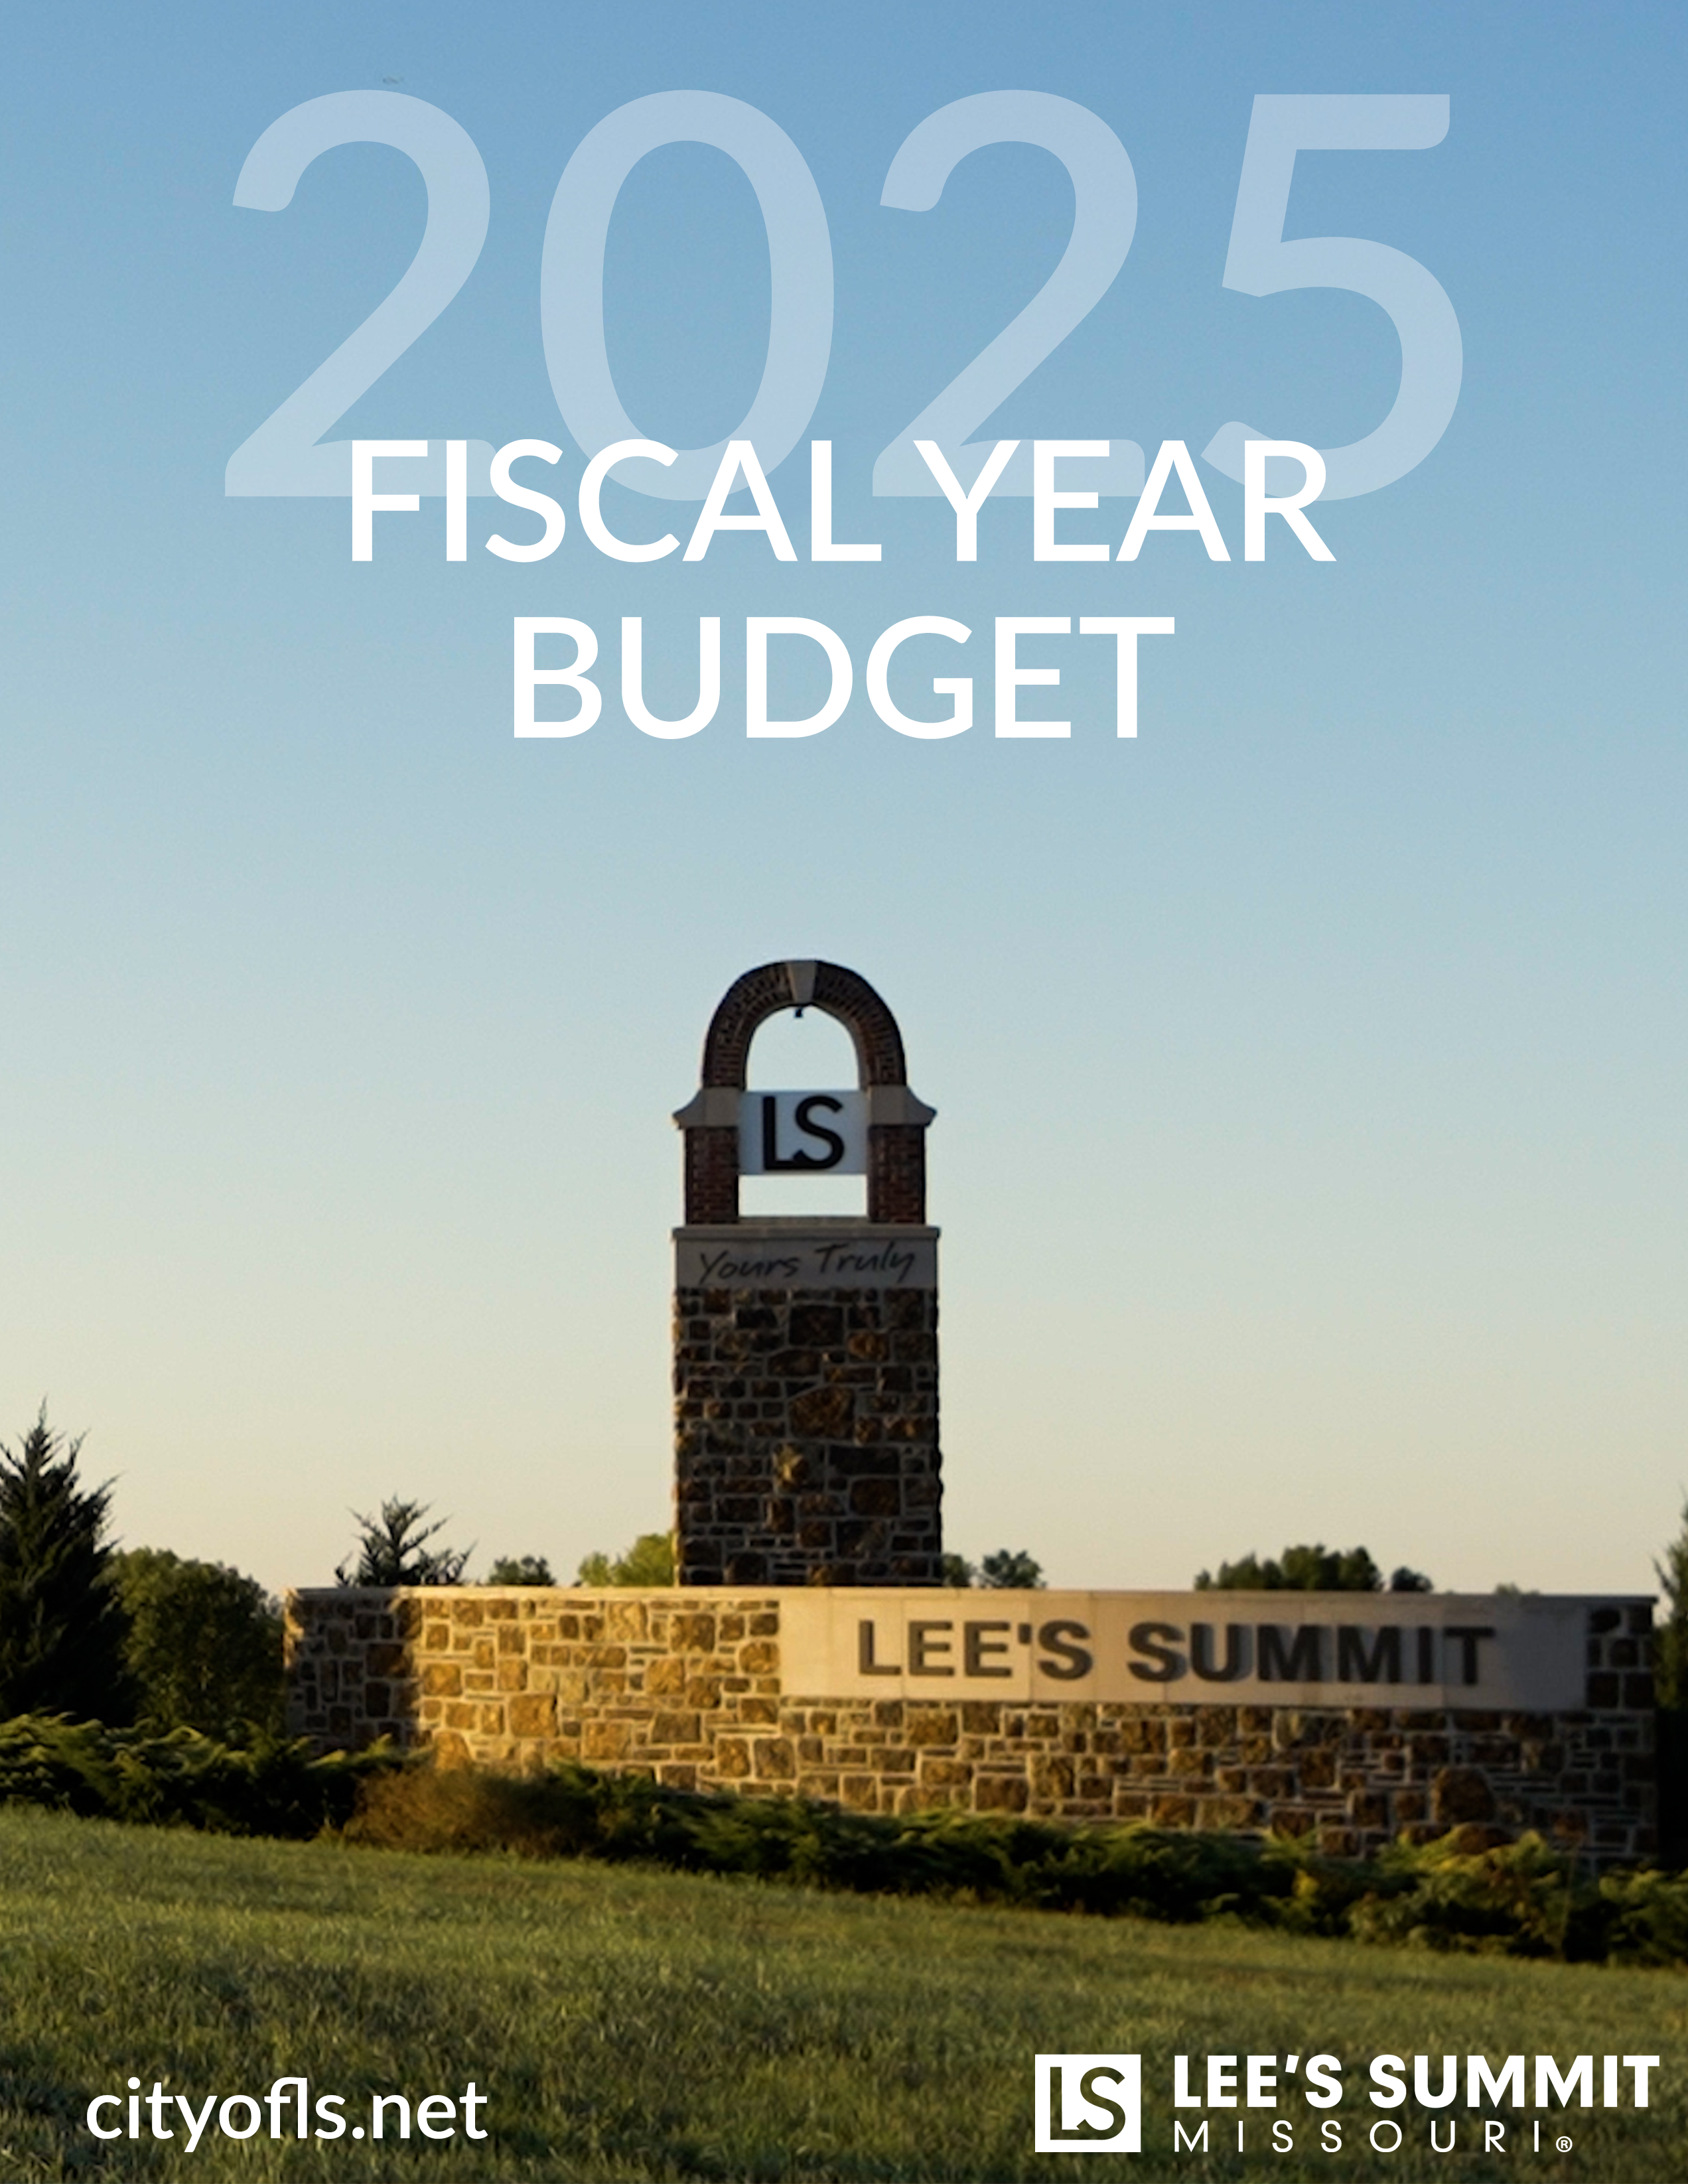 Fiscal Year 2025 Budget